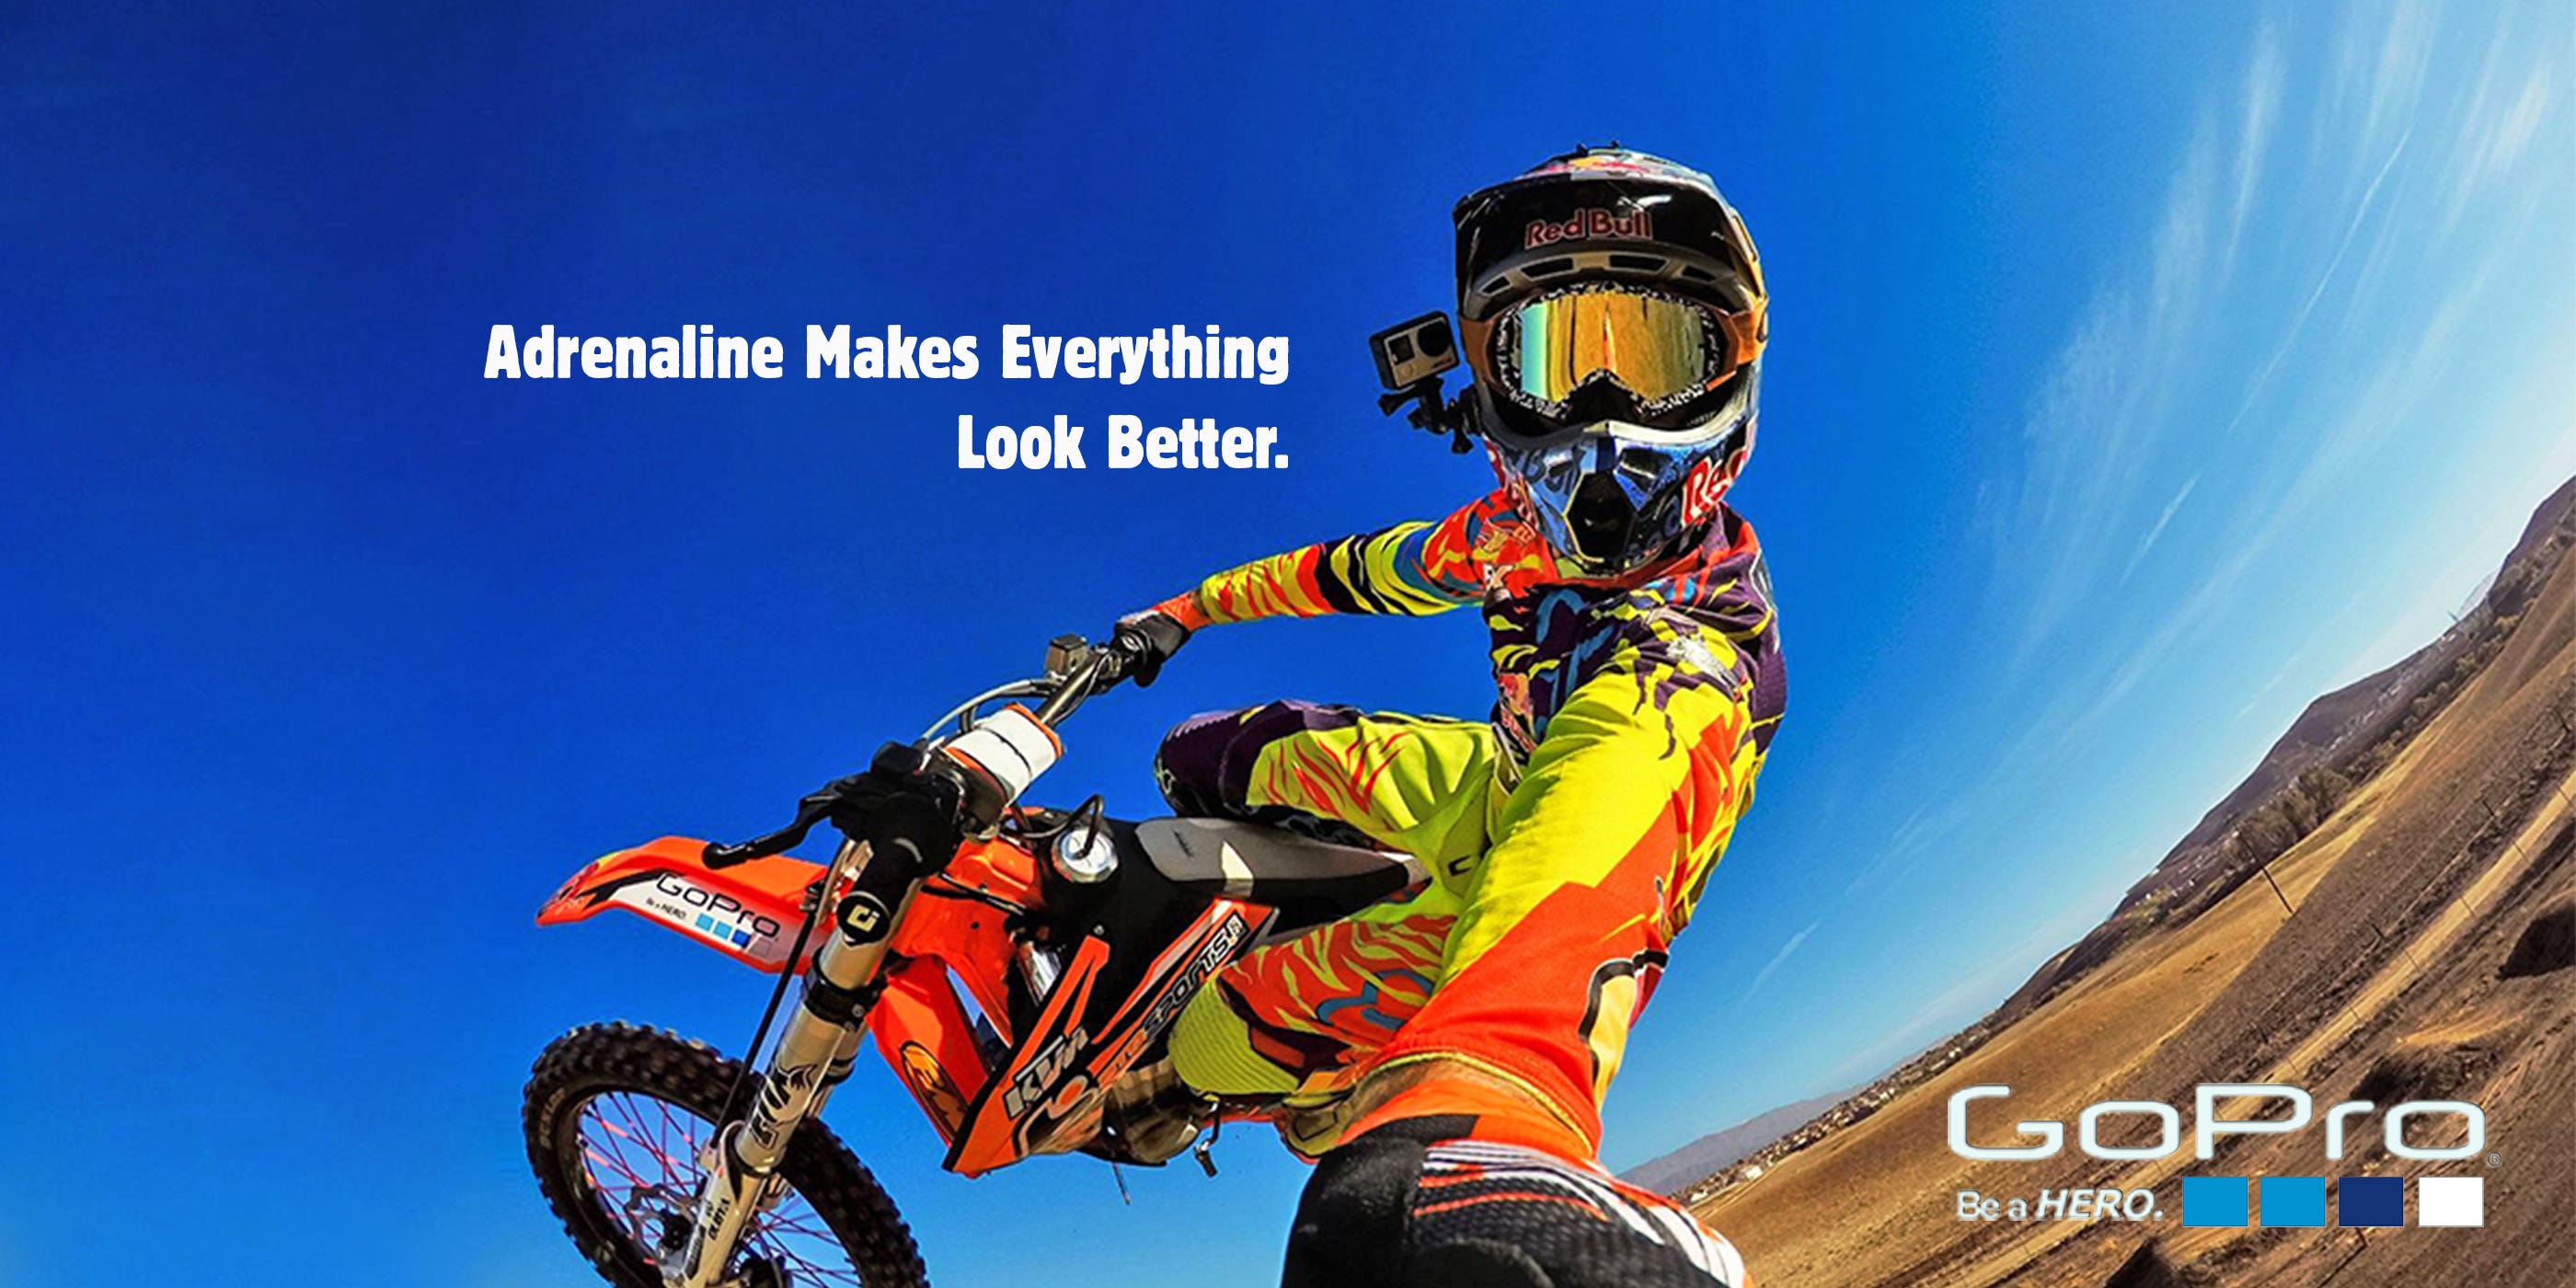 Adrenaline Makes Everything Look Better. | by Anway Pramanik | Makings  Print Ads For My Favourite Brands | Medium